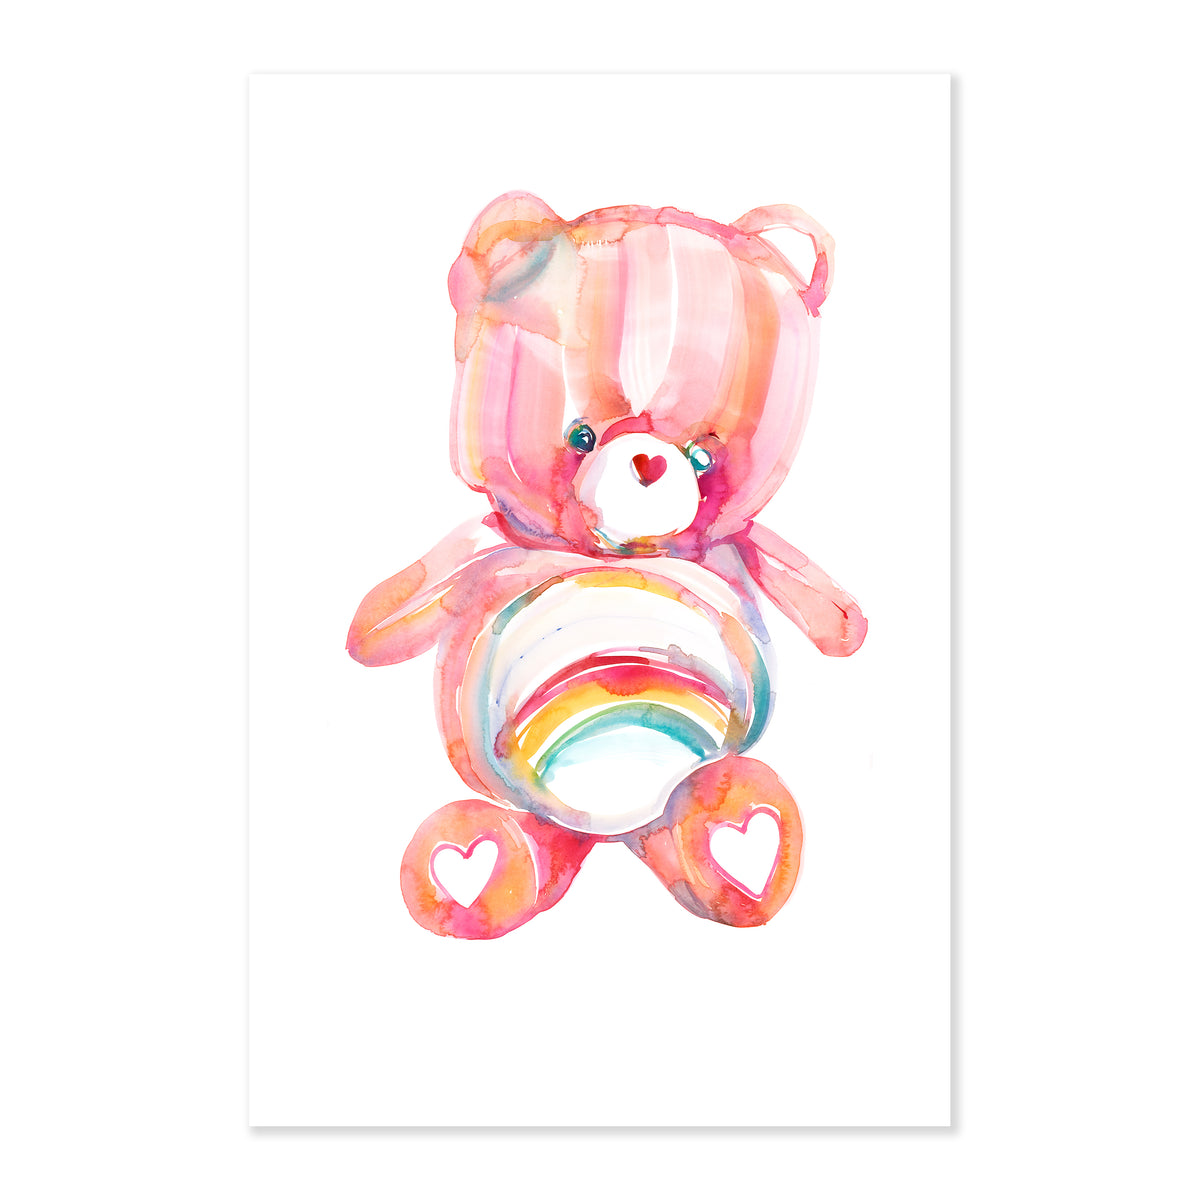 A fine art print illustrating a sitting pink care bear with a rainbow on its belly and a white heart on each foot painted in watercolor on a soft white background